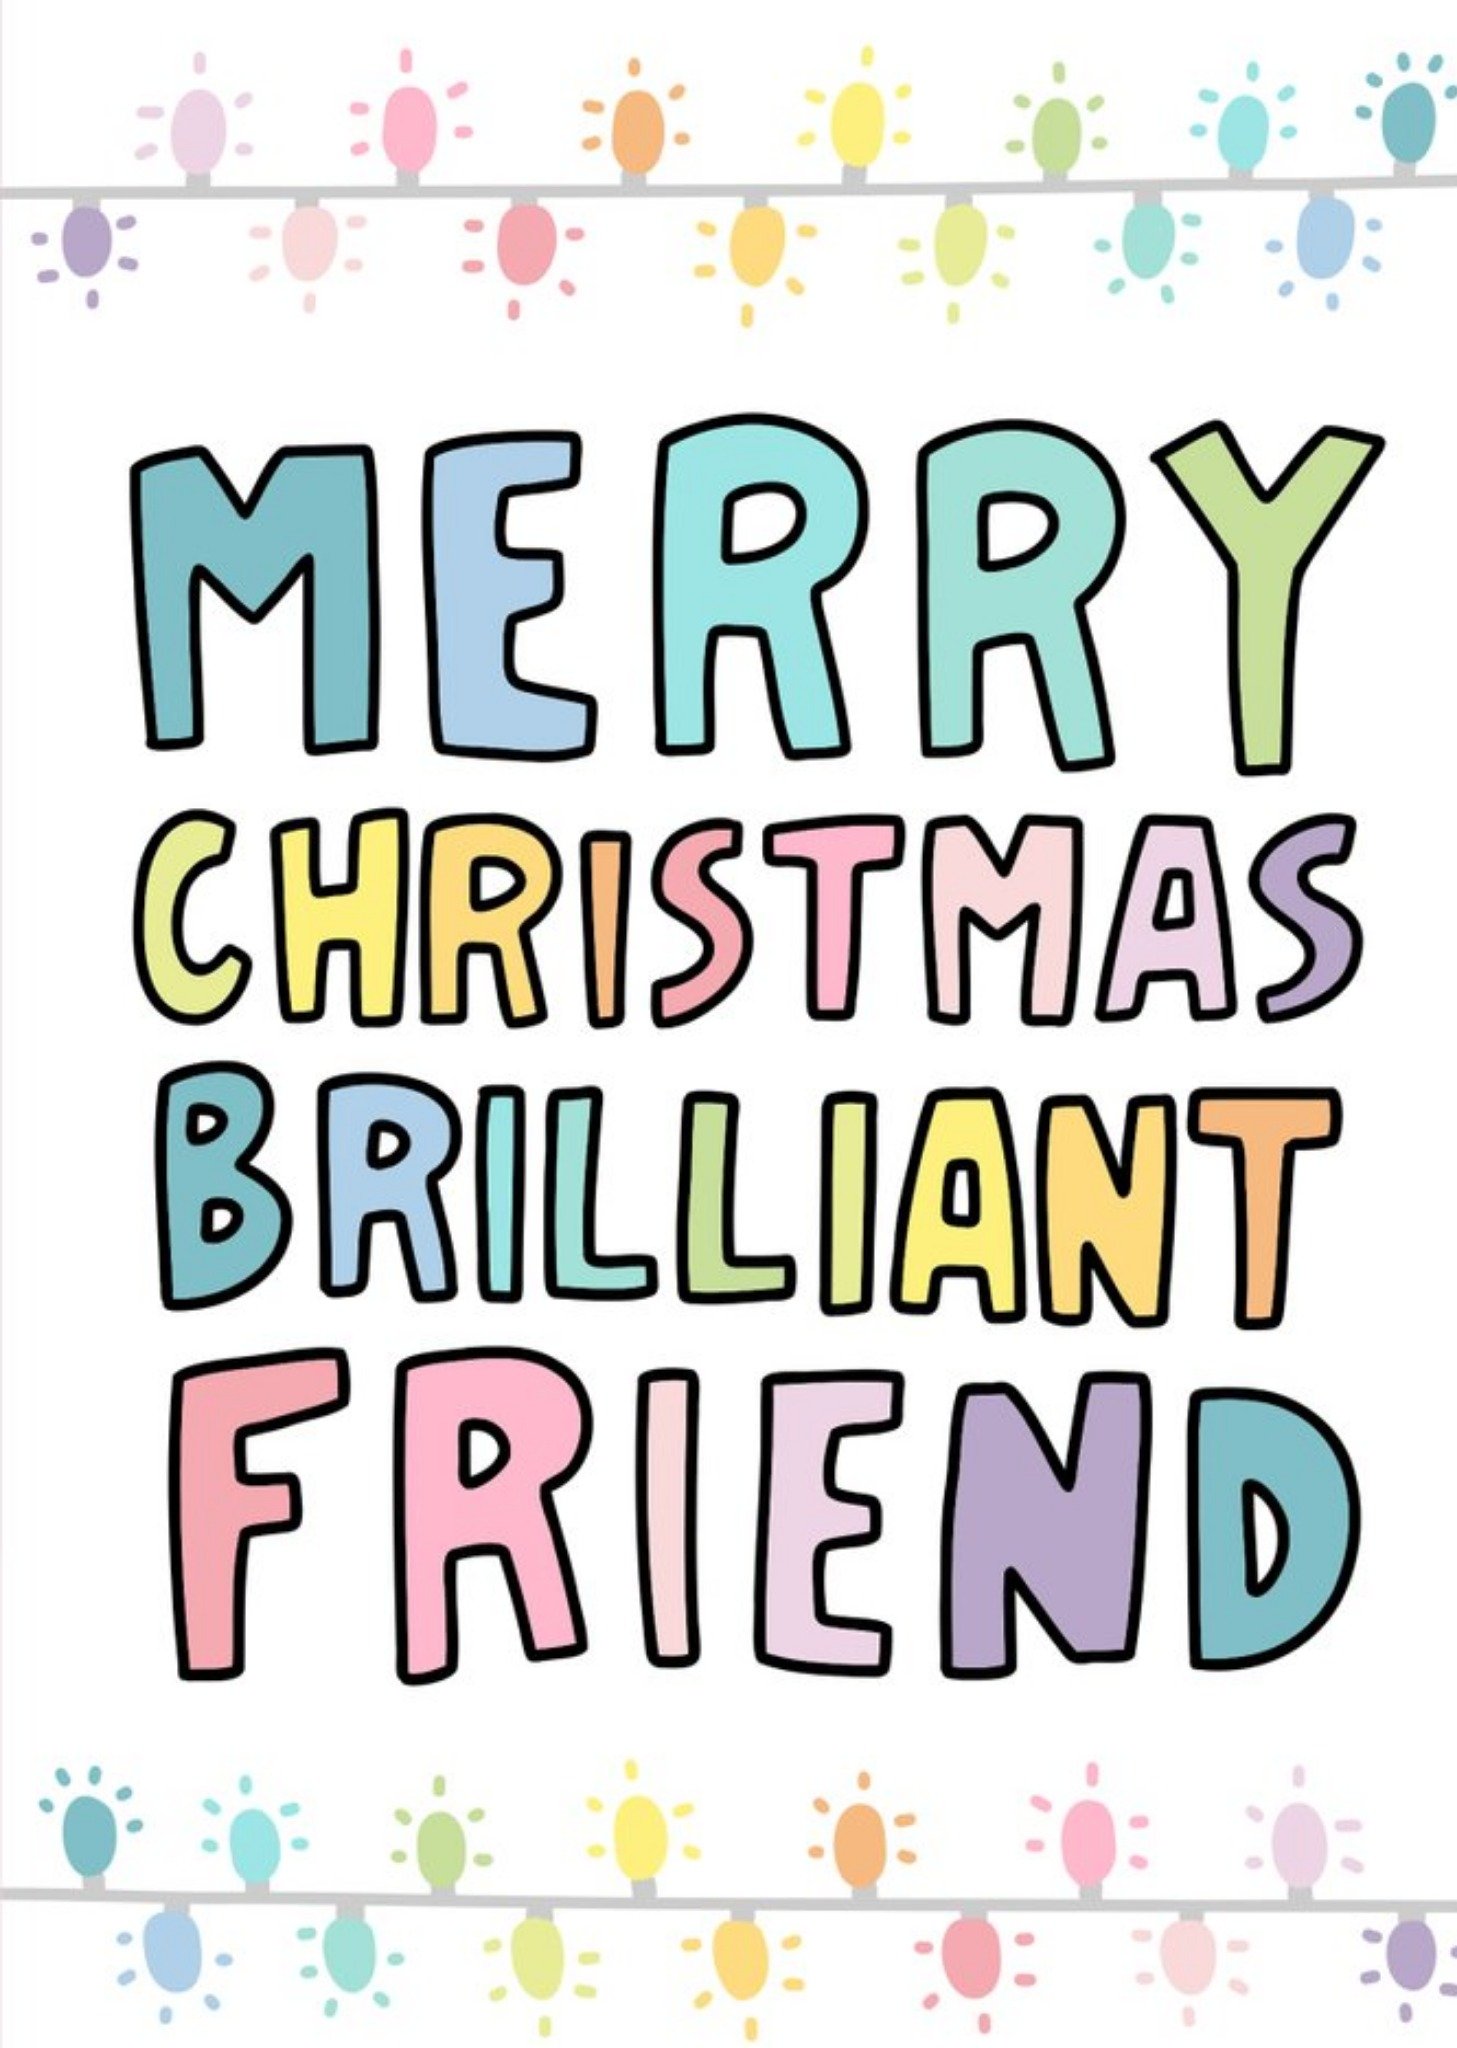 Moonpig Merry Christmas Brilliant Friend Typographic Card, Large